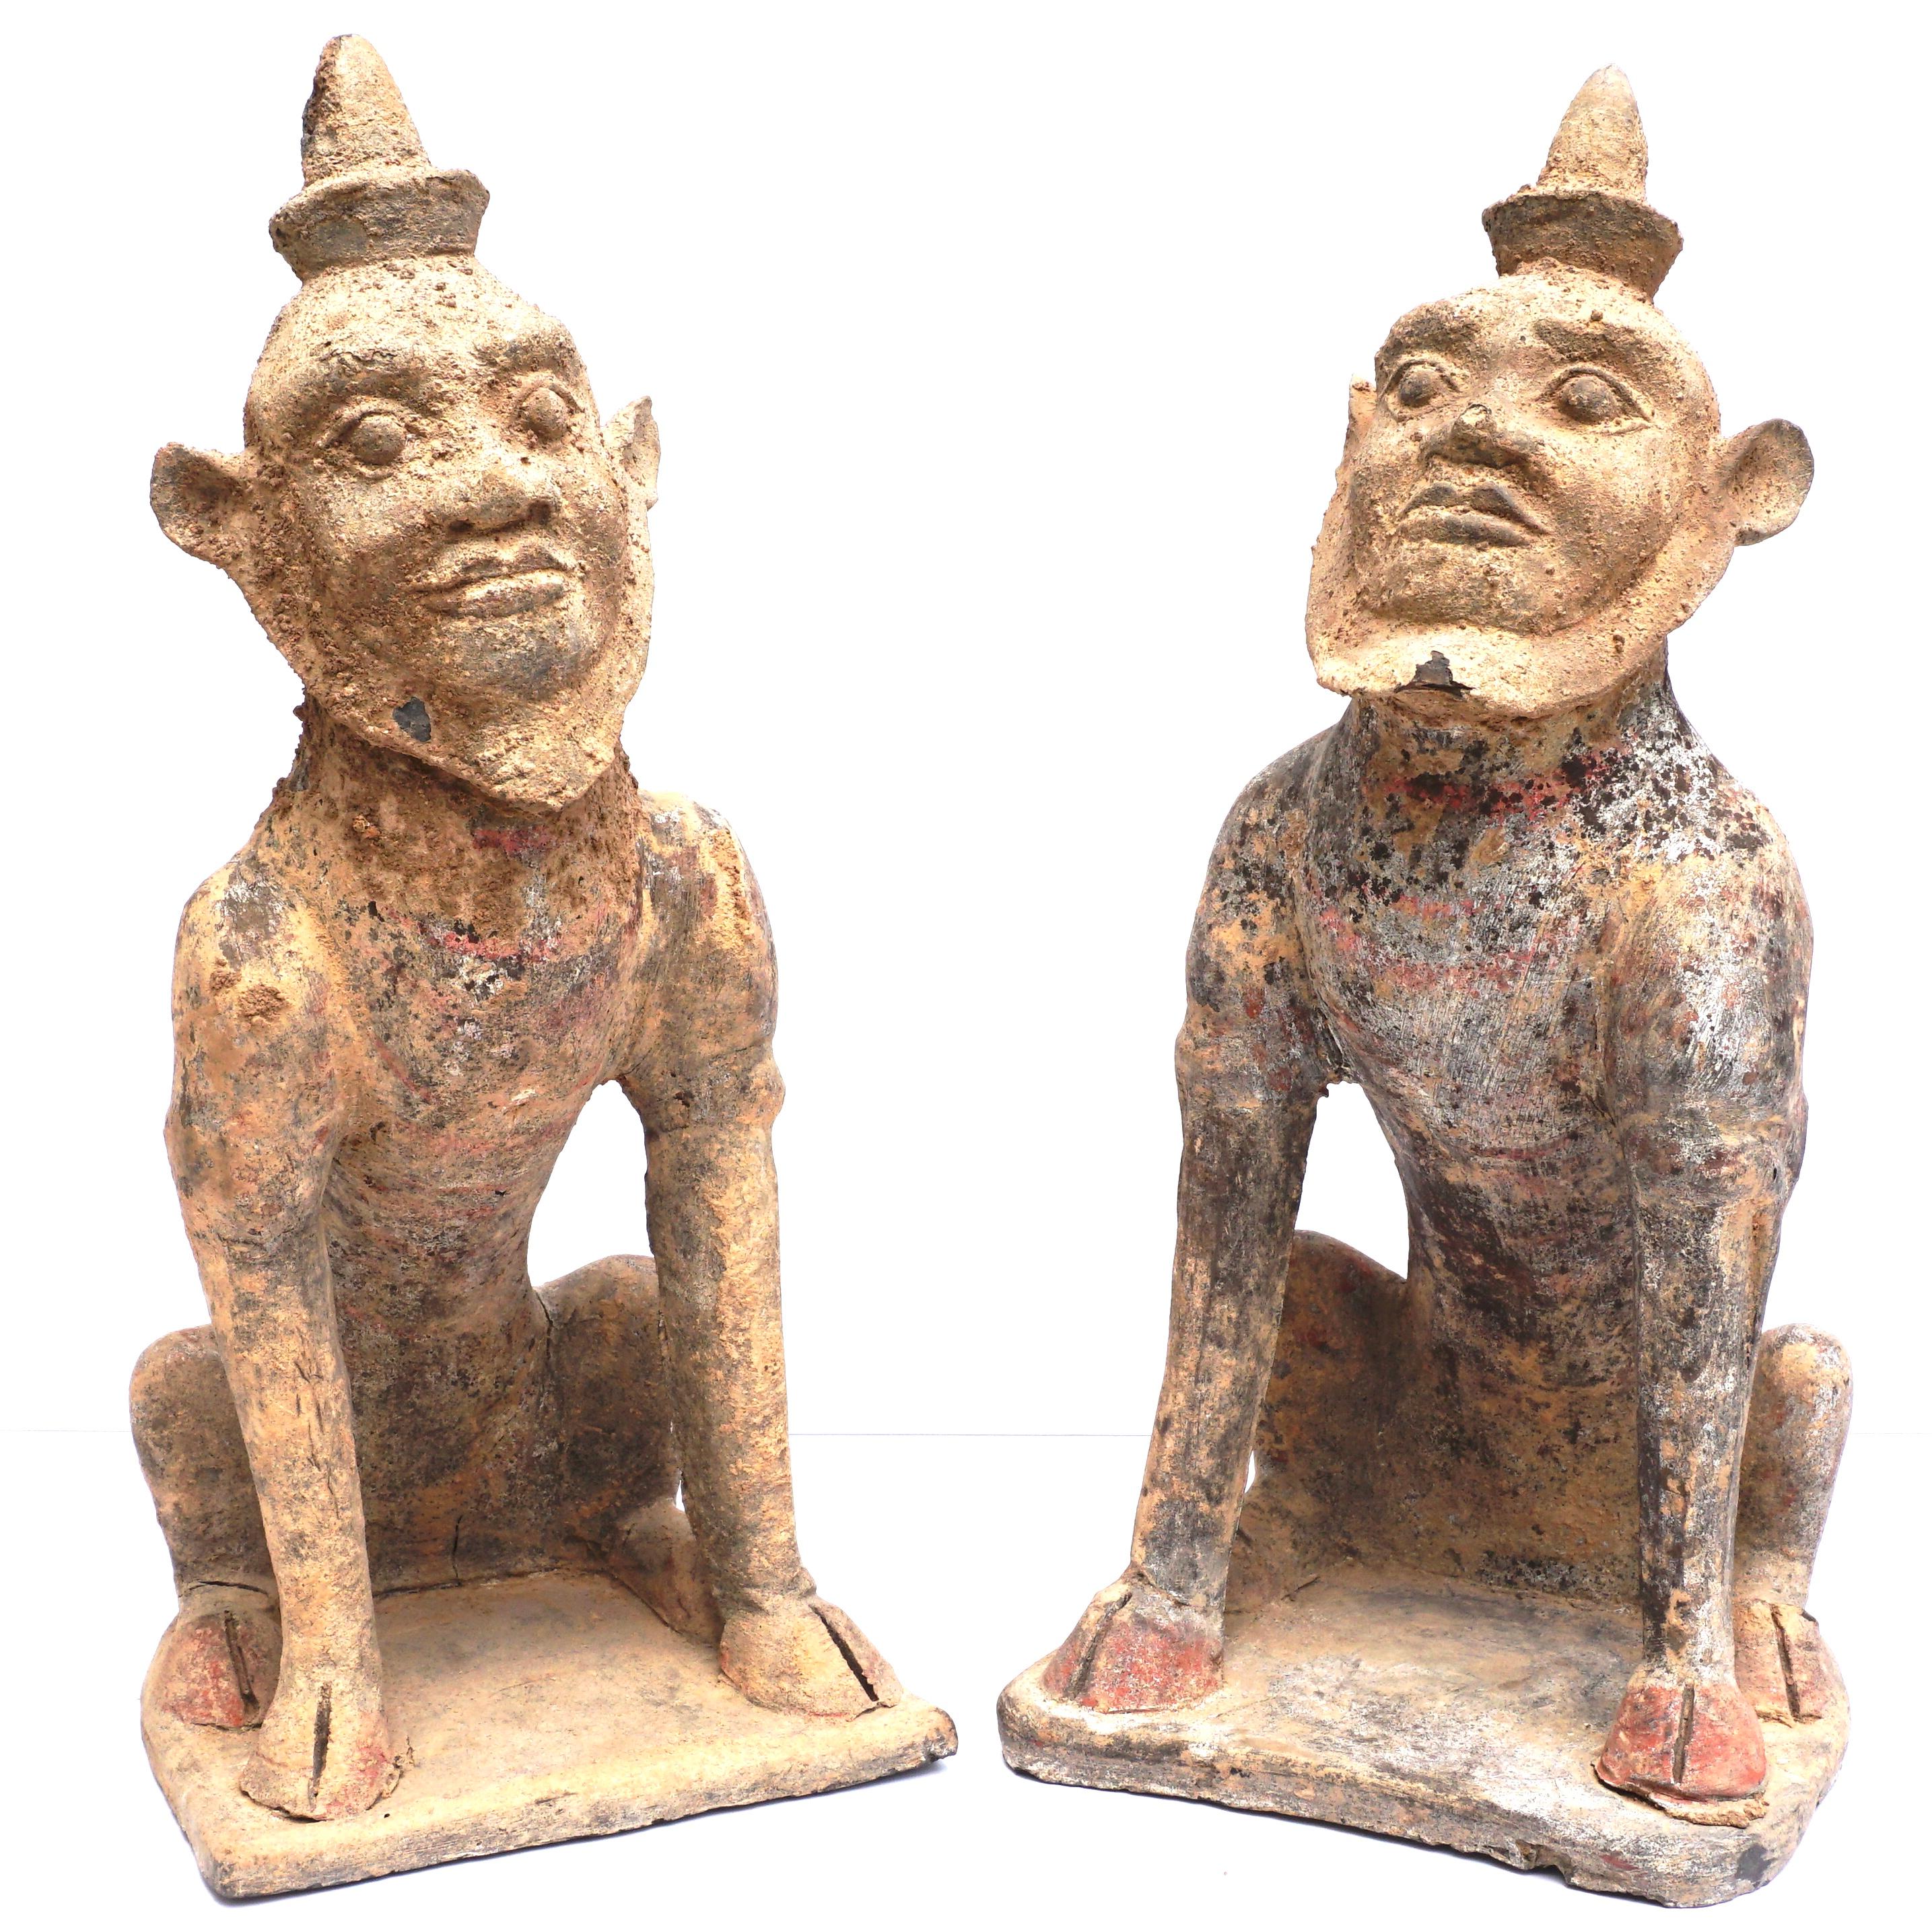 Chinese, Tang Dynasty (618 AD to 906 AD) 
A pair of semi-human earth spirit figures seated on their haunches with cloven hooves planted firmly on the base. Both wearing conical mandarin style hats, their bearded face peering upward with a placid